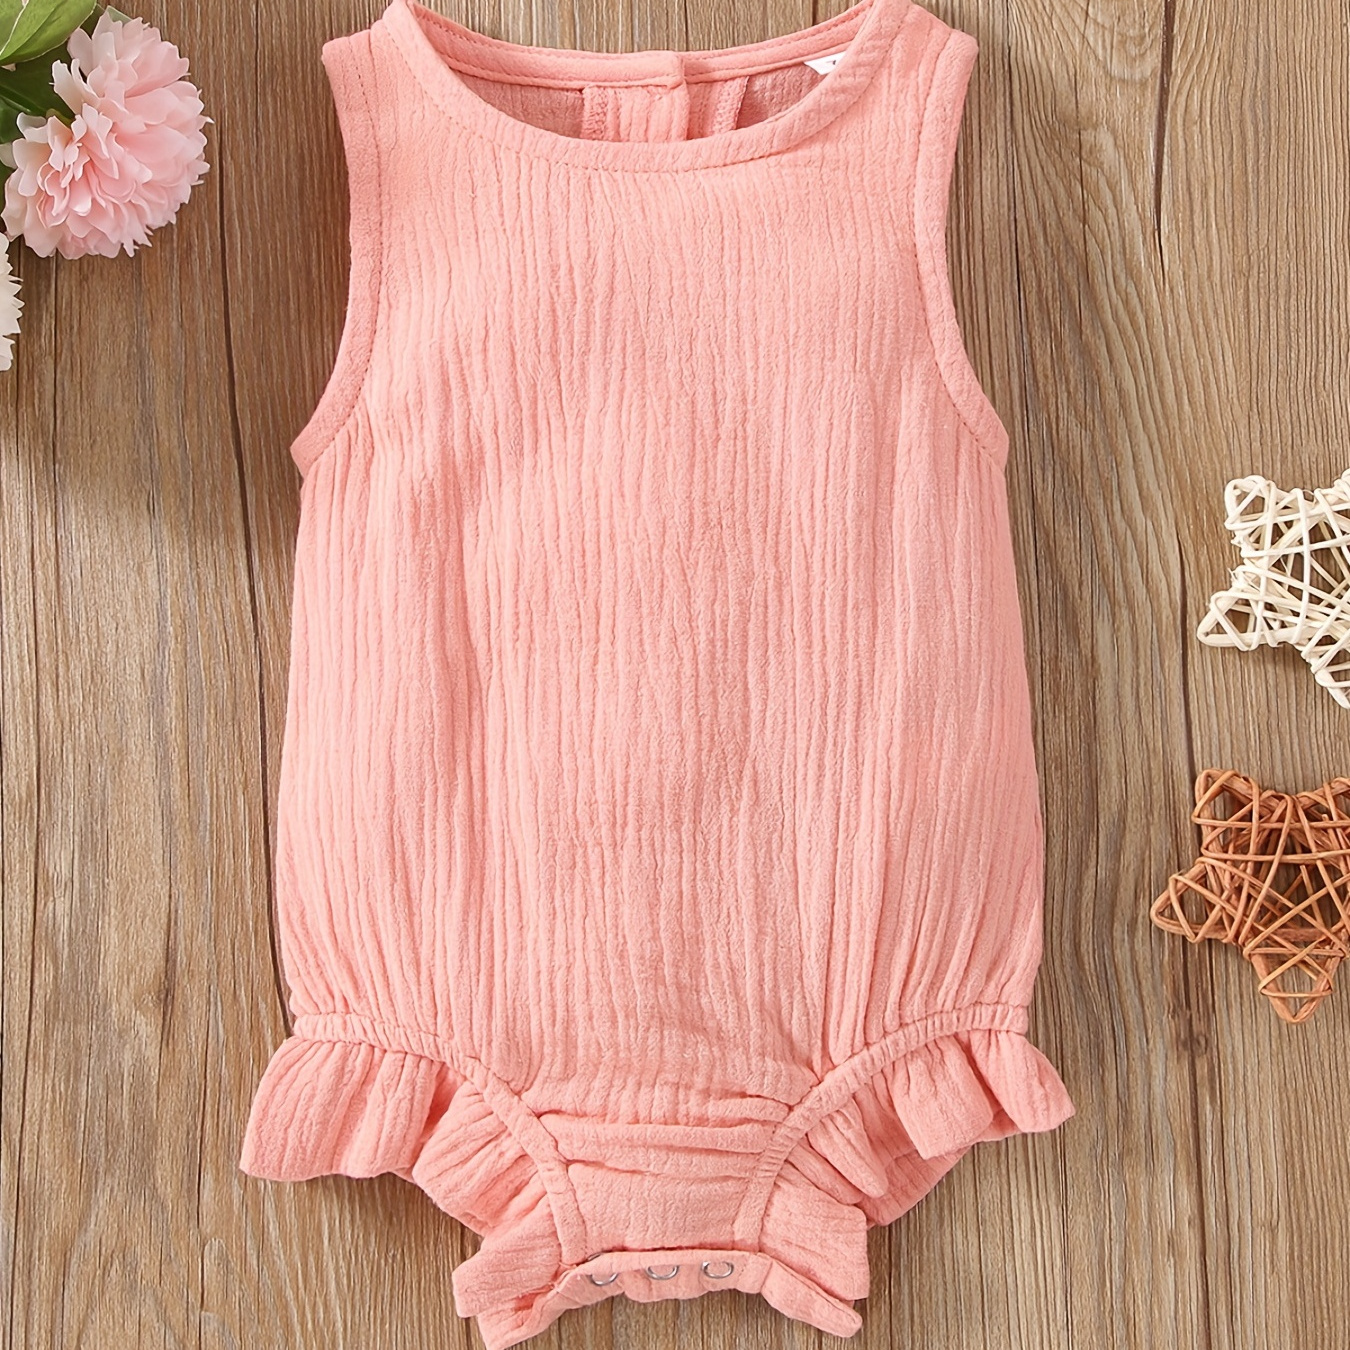 

Baby Girls Casual Plain Color Ruffle Trim Sleeveless Muslin Onesie Clothes For Summer